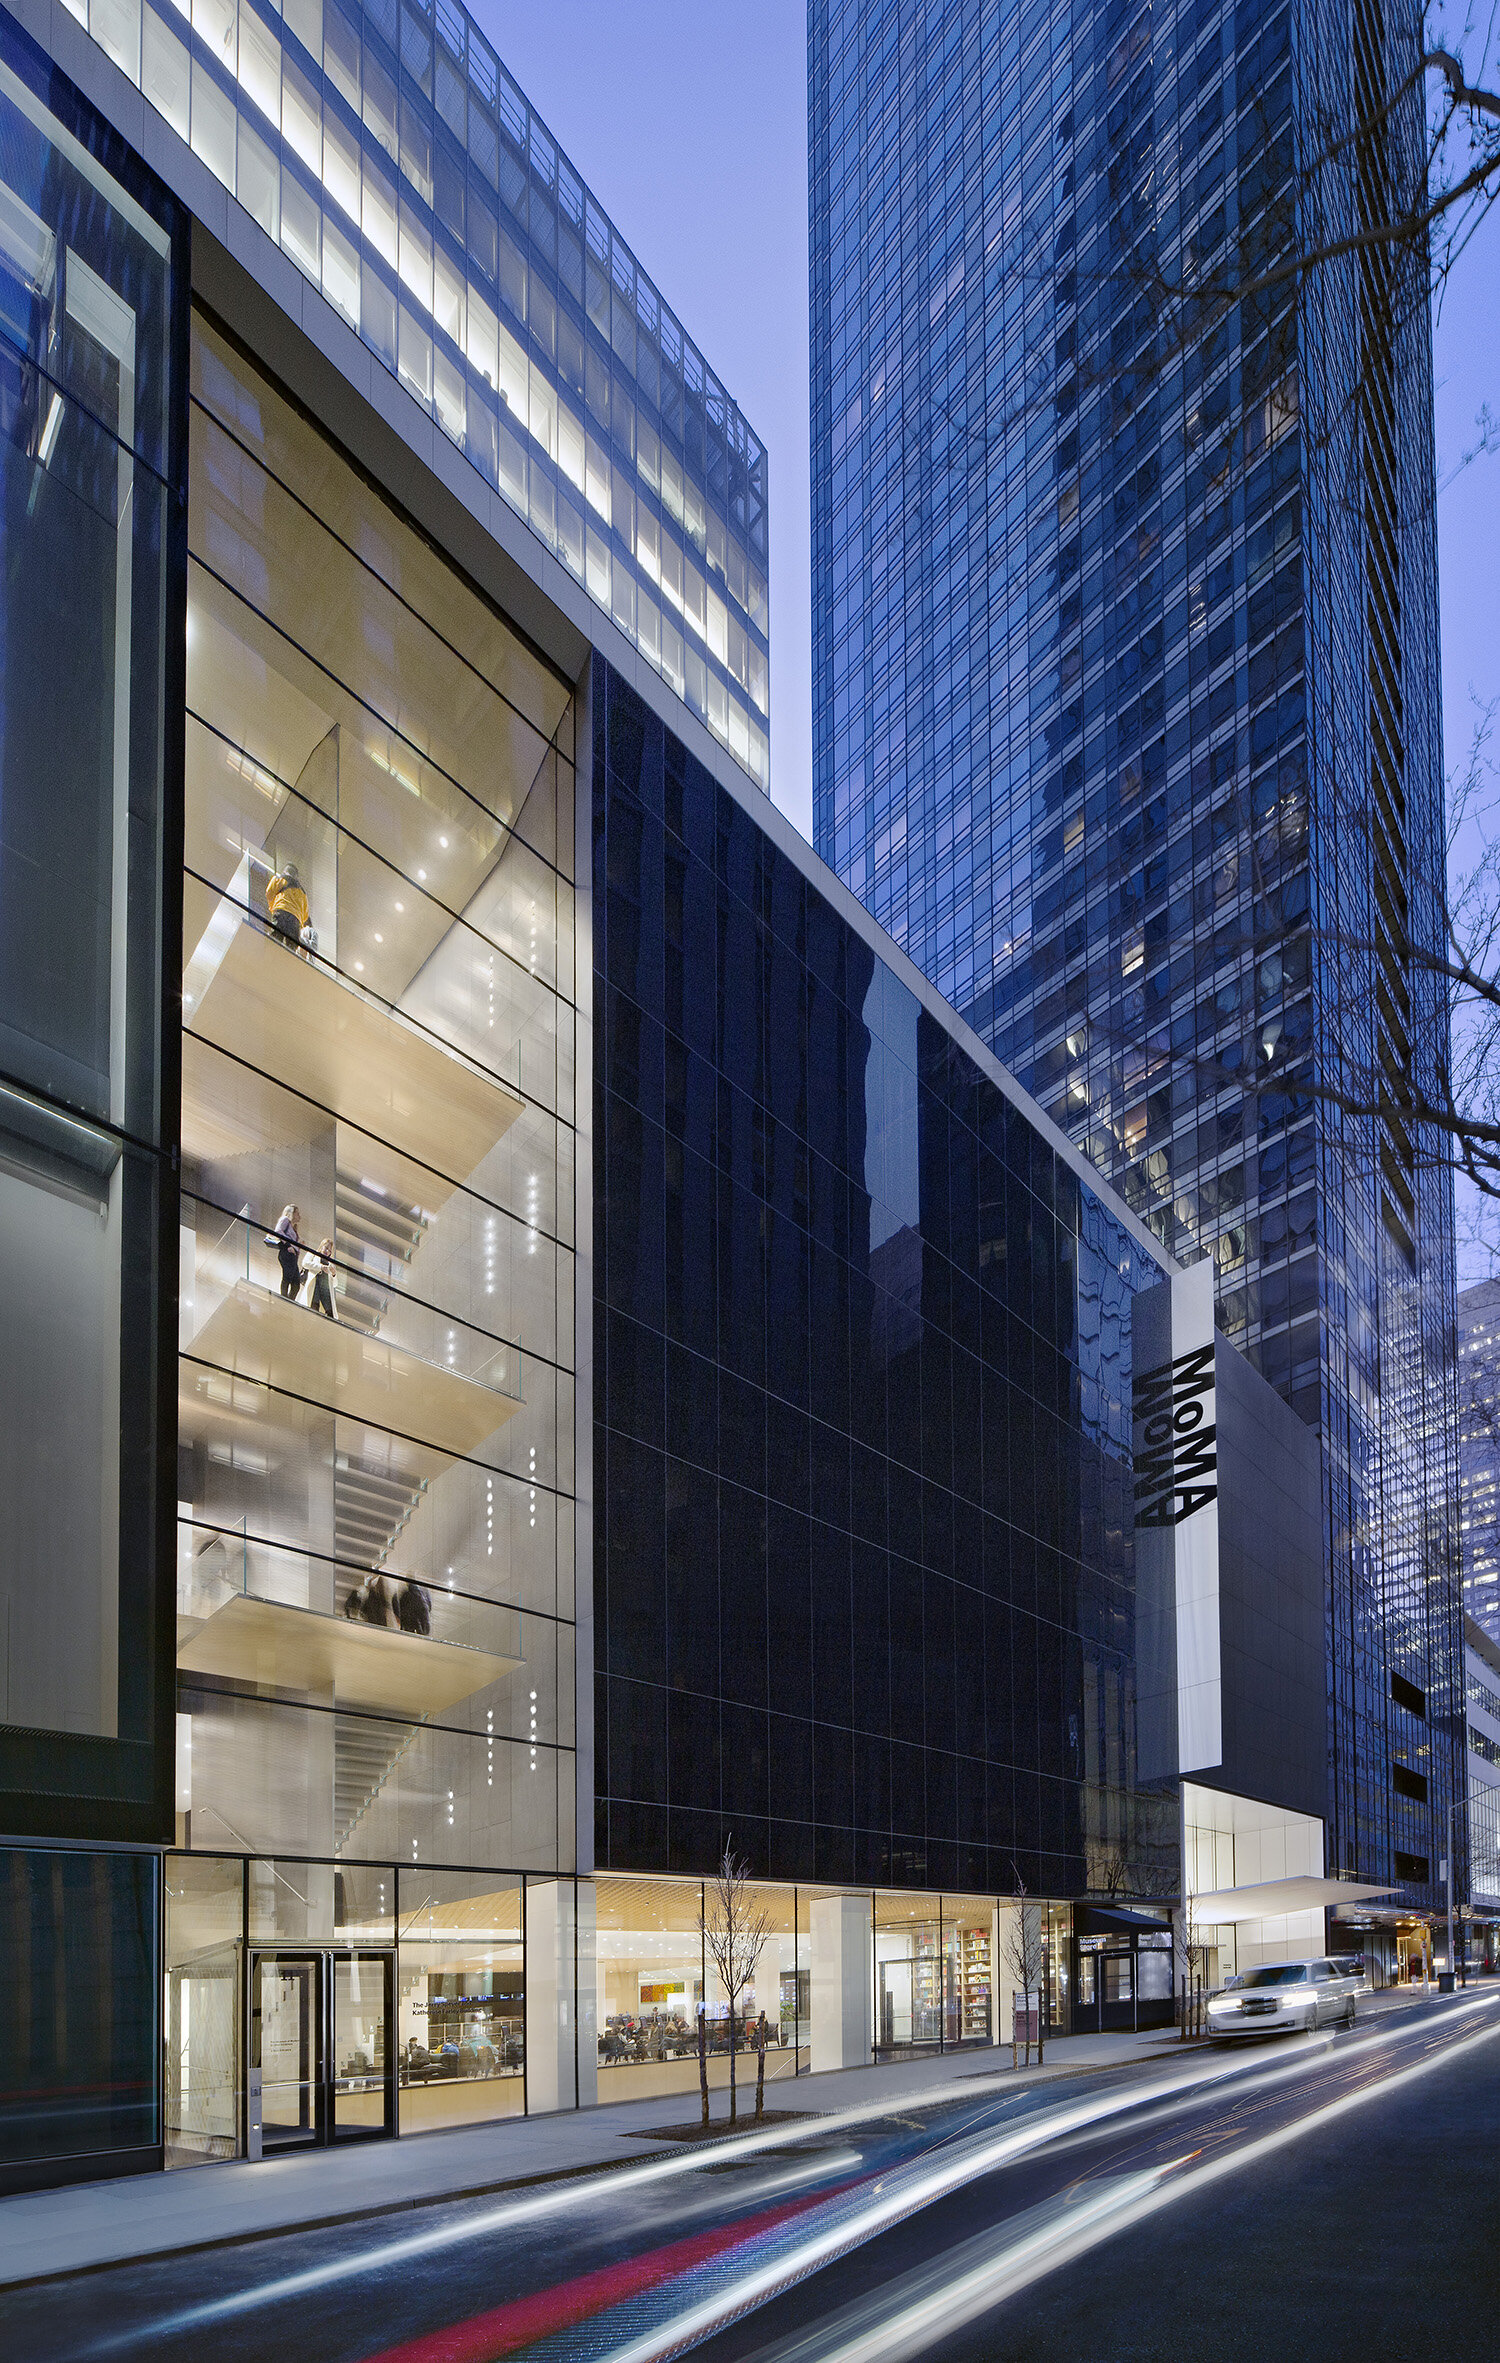 Renovation of MoMA in NYC. Designed by Diller Scofidio + Renfro 